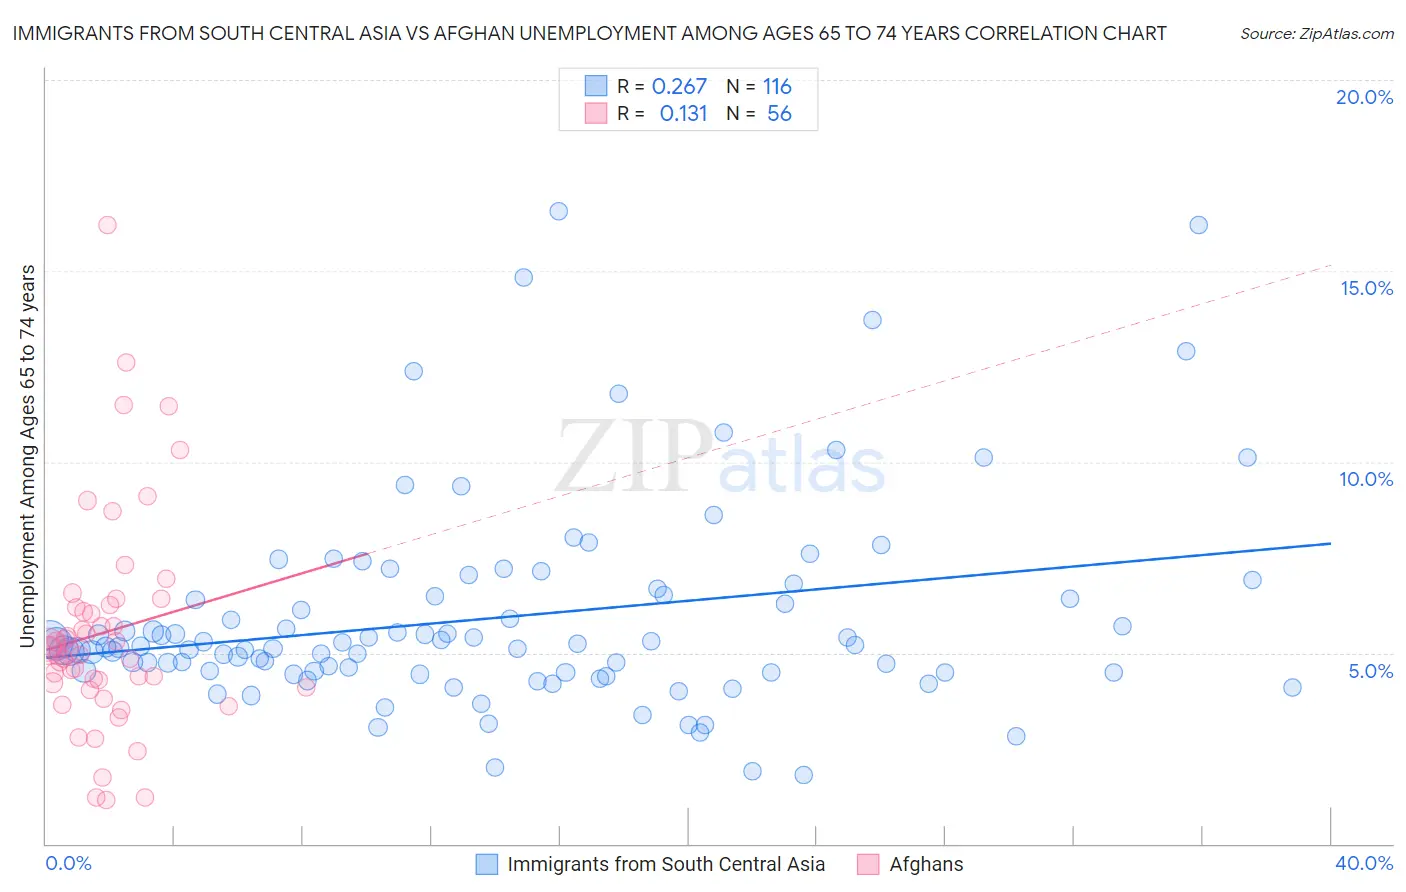 Immigrants from South Central Asia vs Afghan Unemployment Among Ages 65 to 74 years